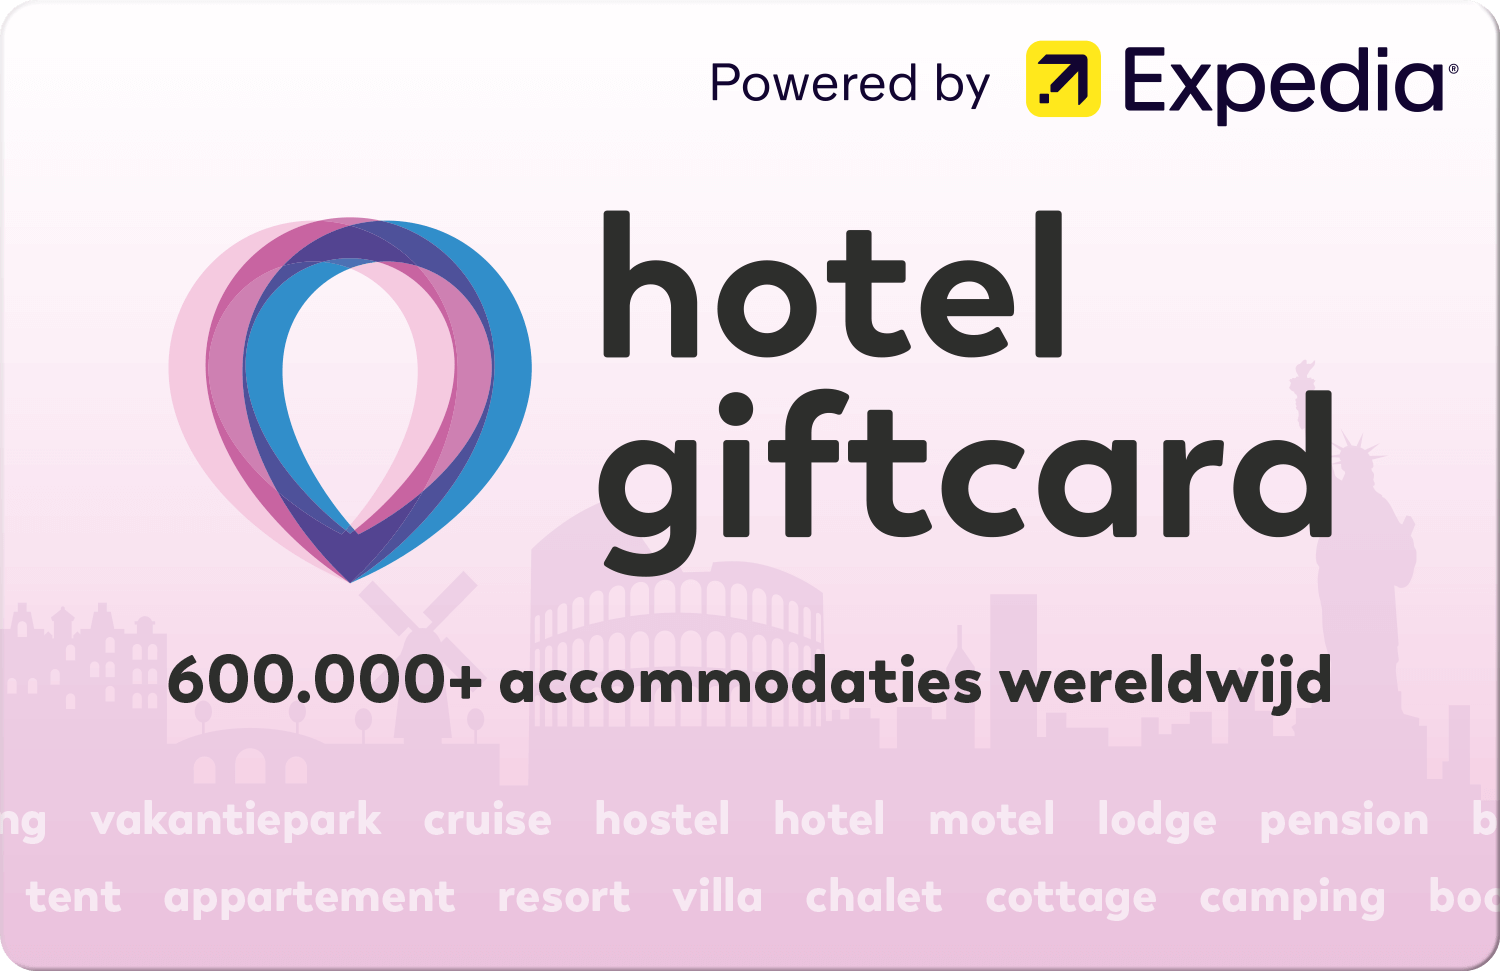 Hotelgiftcard NL